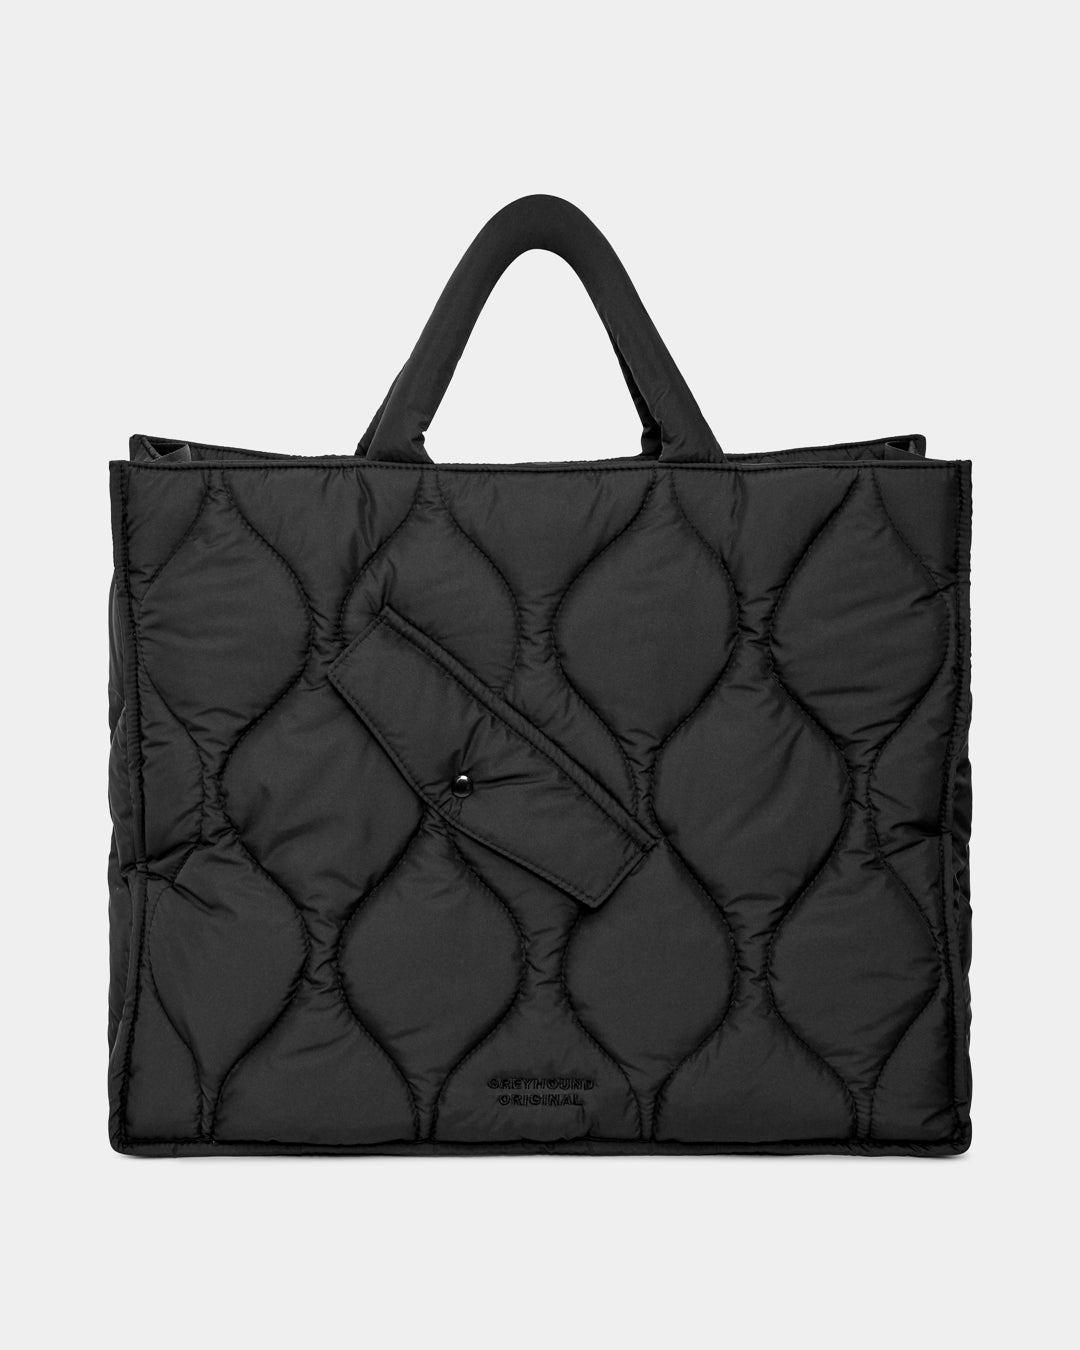 GH GREEN LABEL QUILTED LINER TOTE BAG ♻️